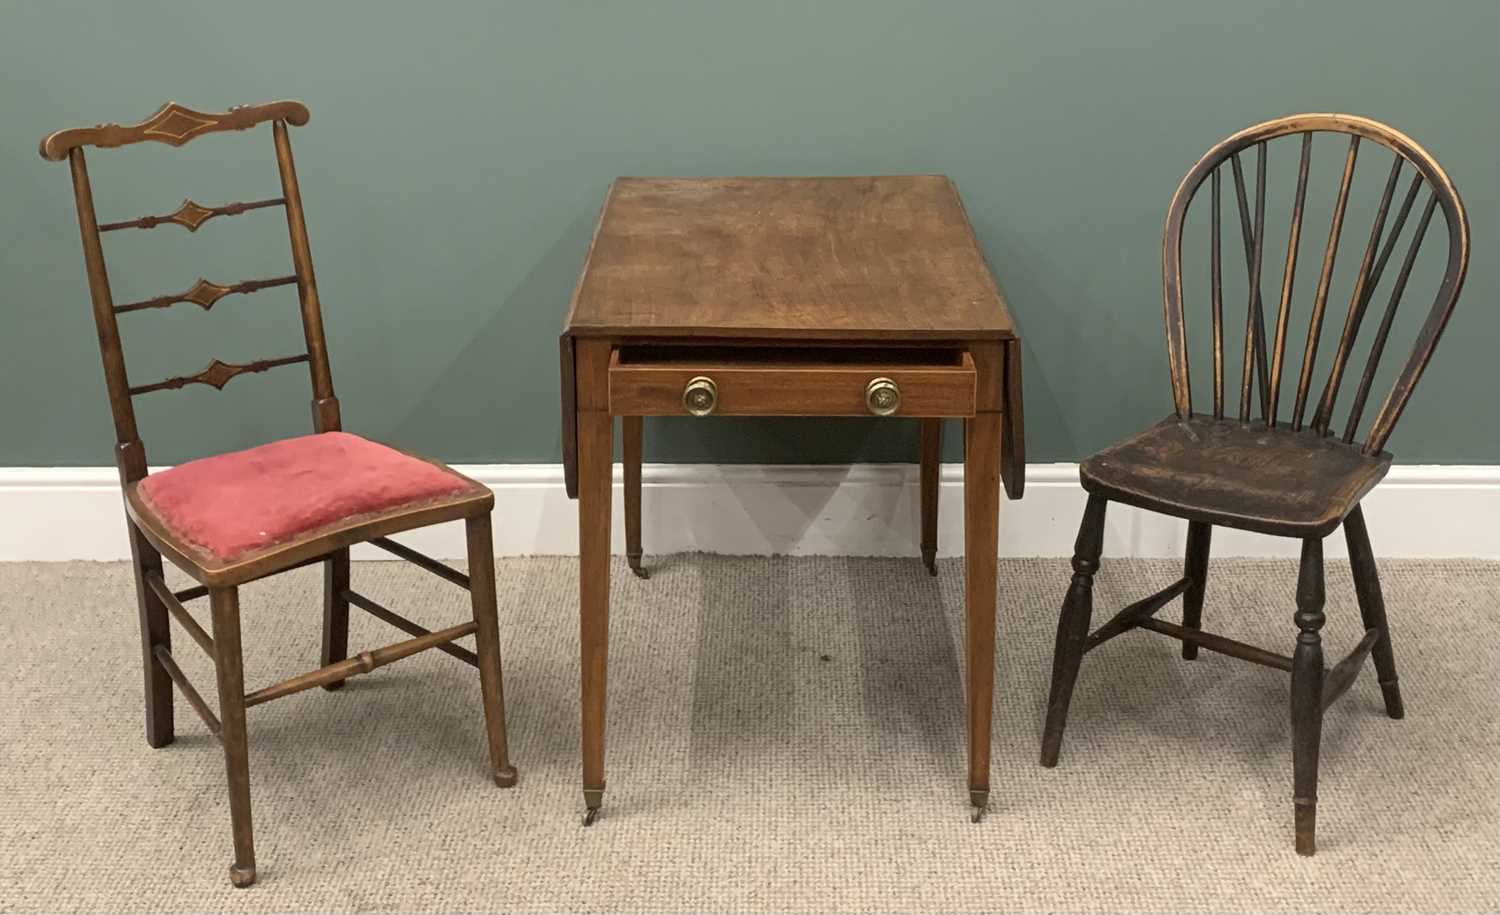 THREE ITEMS OF VINTAGE FURNITURE comprising Victorian mahogany Pembroke table with tapered